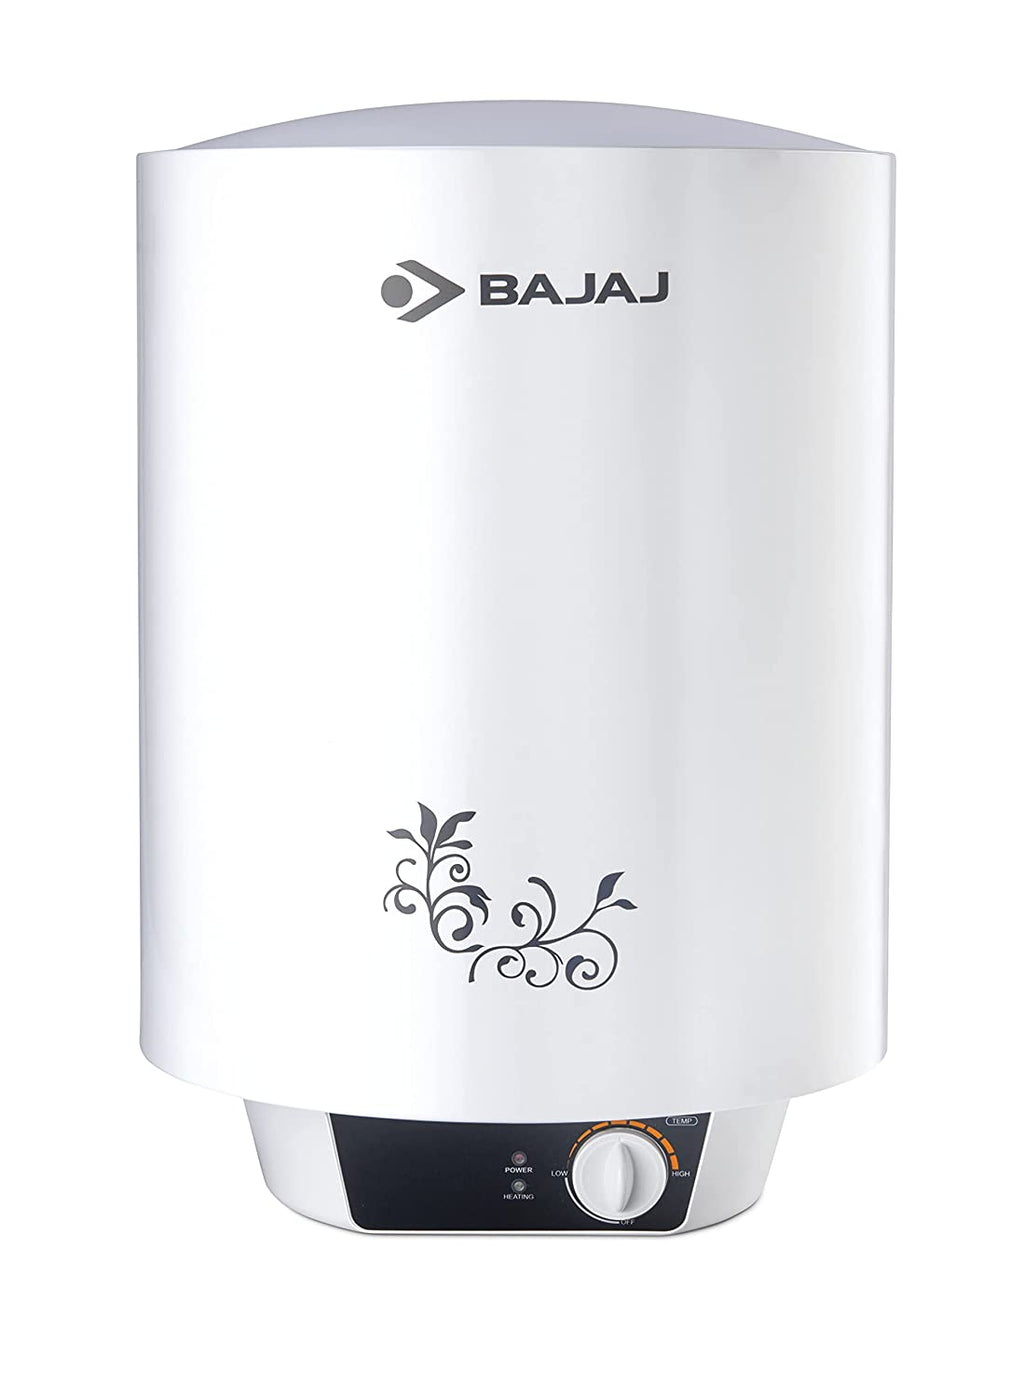 Bajaj New Shakti Neo 25L Metal Body 4 Star Water Heater with Multiple Safety System, White